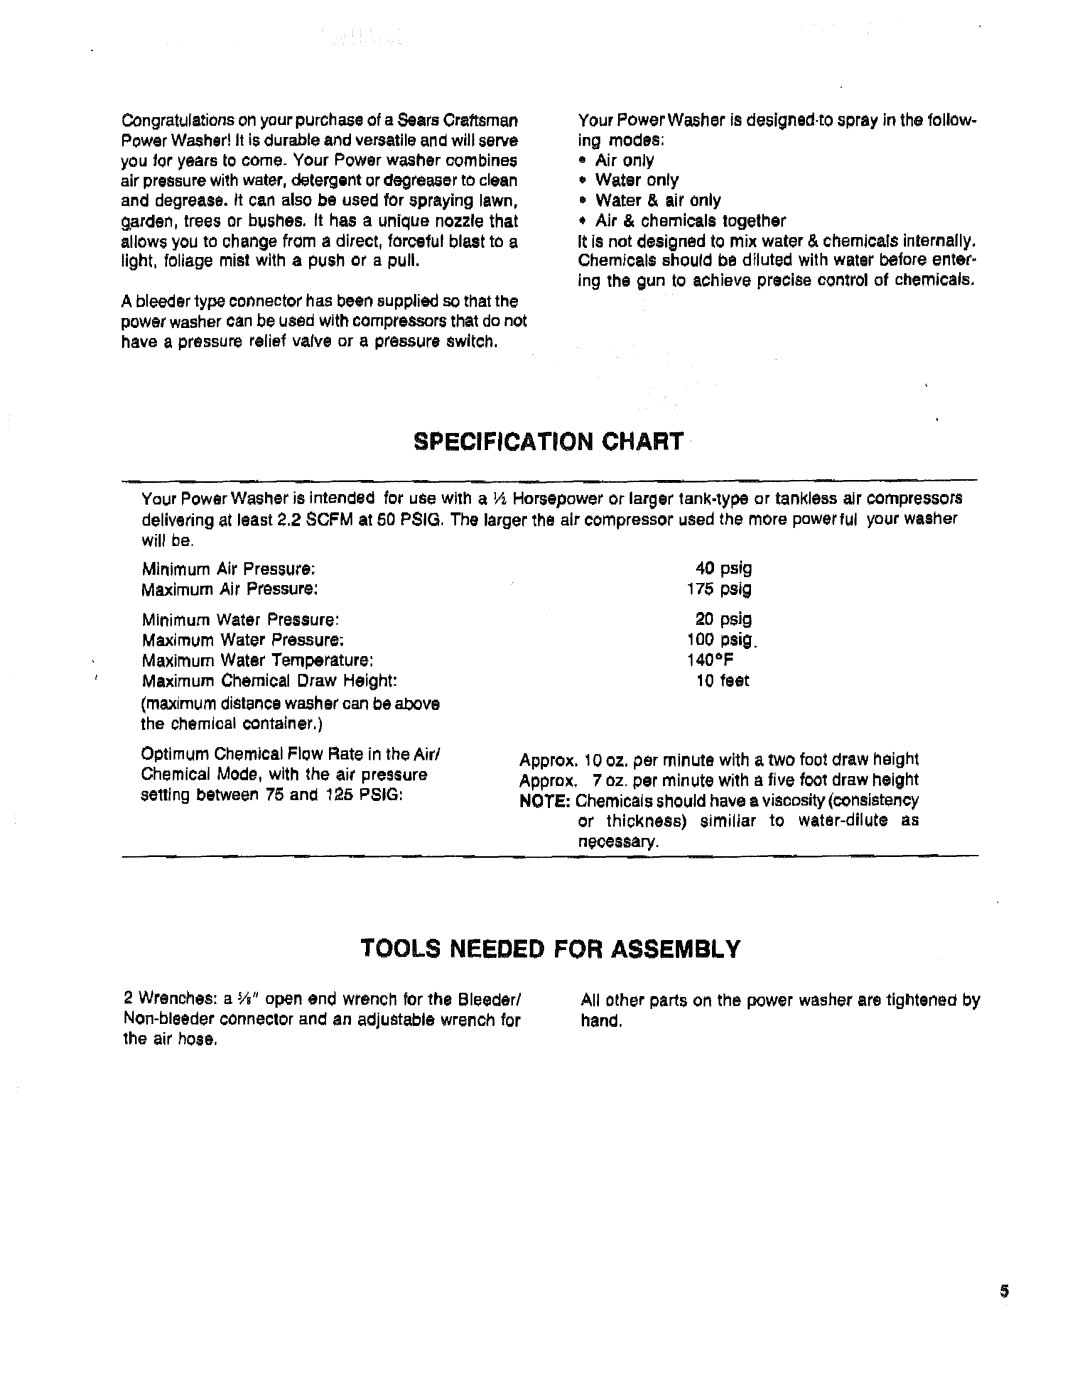 Sears 919.16225 owner manual Specification Chart, Tools Needed, For Assembly, CongratulationsyourpurchaseofaSears Crattsman 